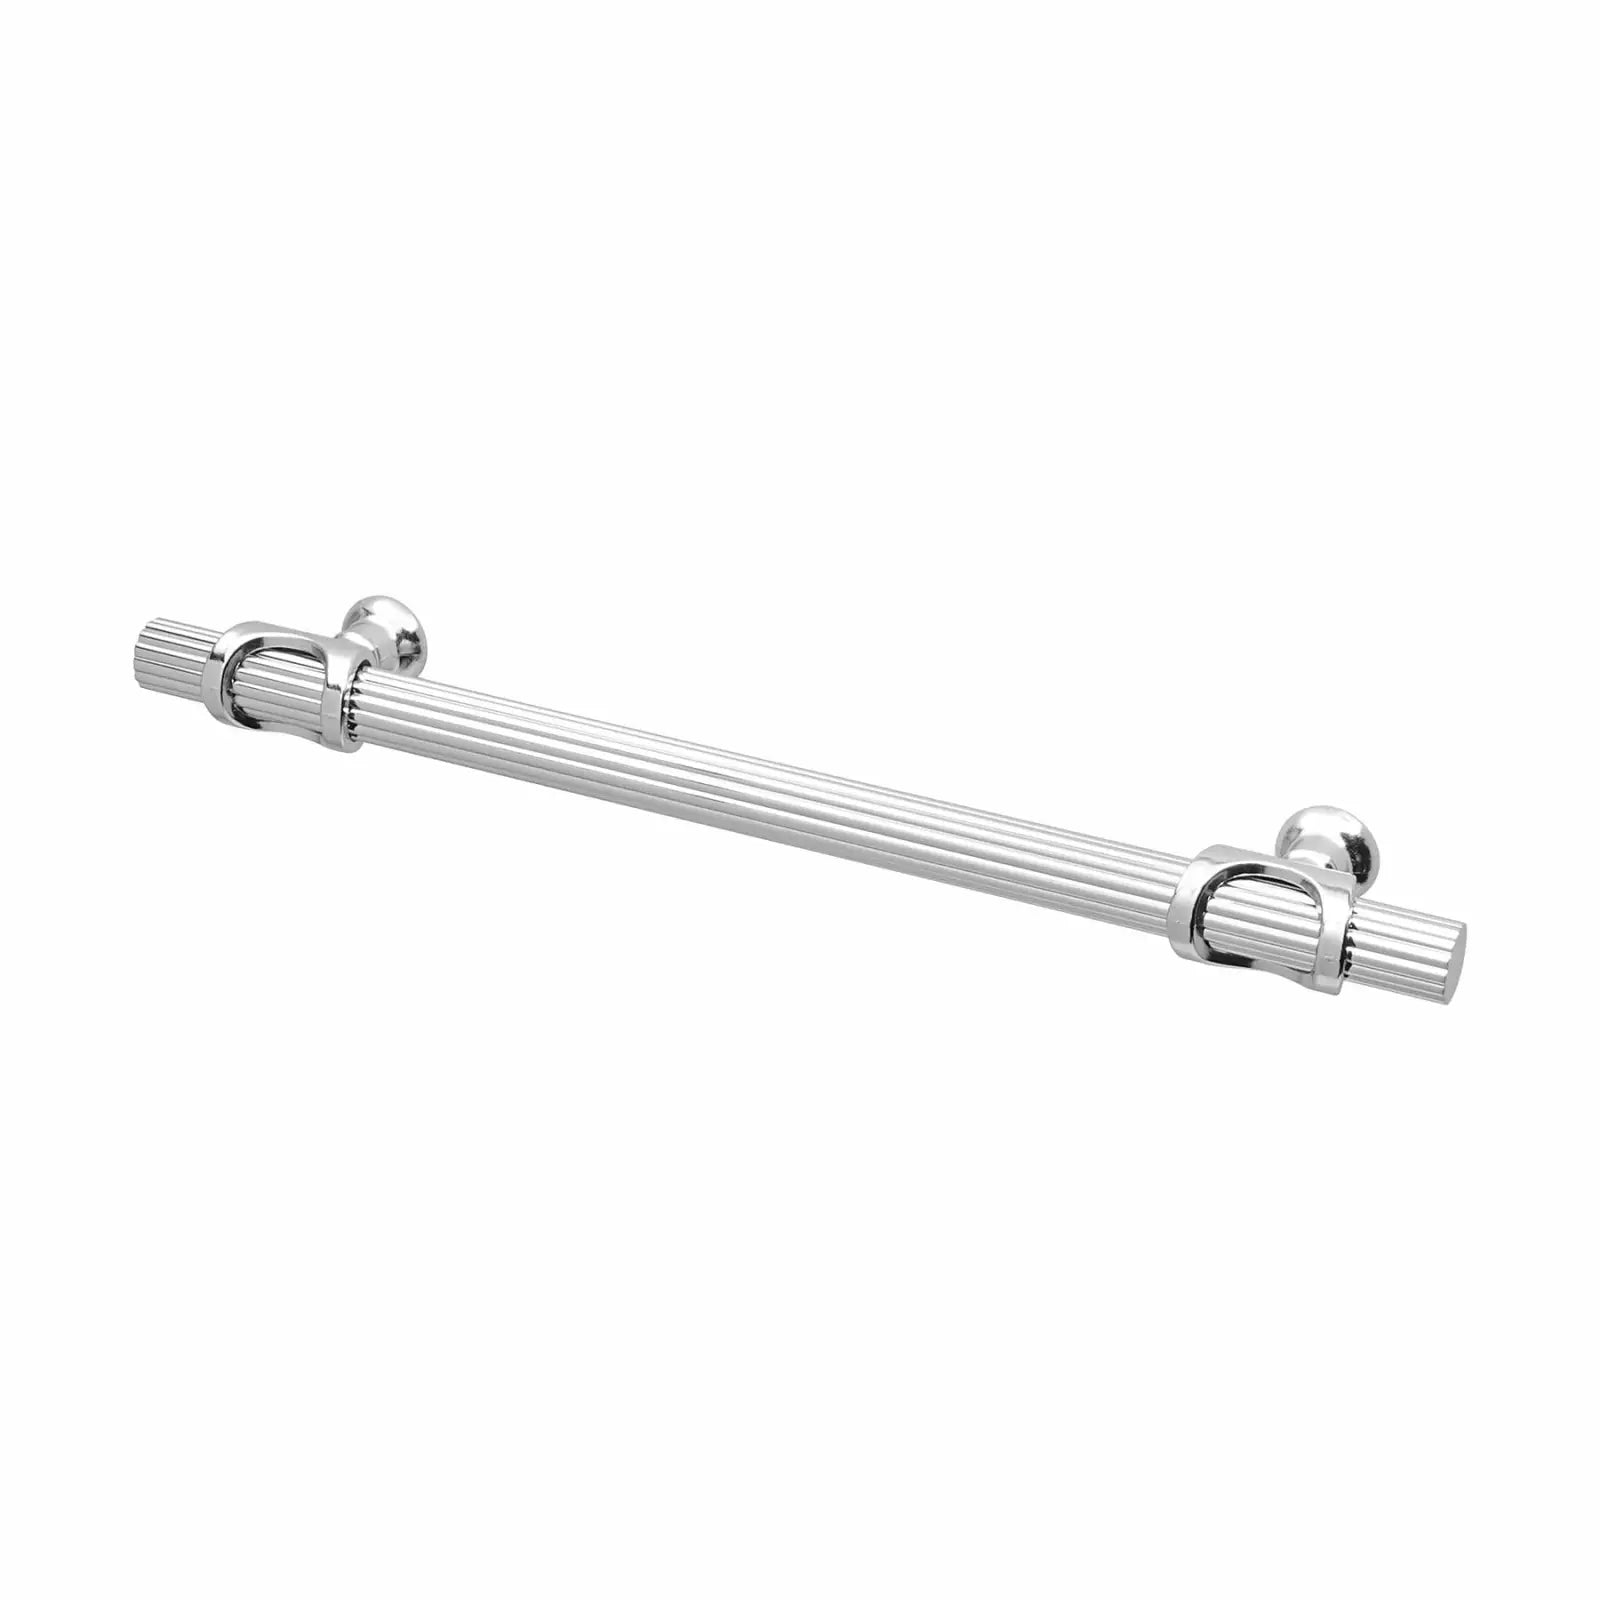 Sienna - Lines Knurled T-Bar Kitchen Cabinet Pull Handle - Polished Chrome - Decor And Decor